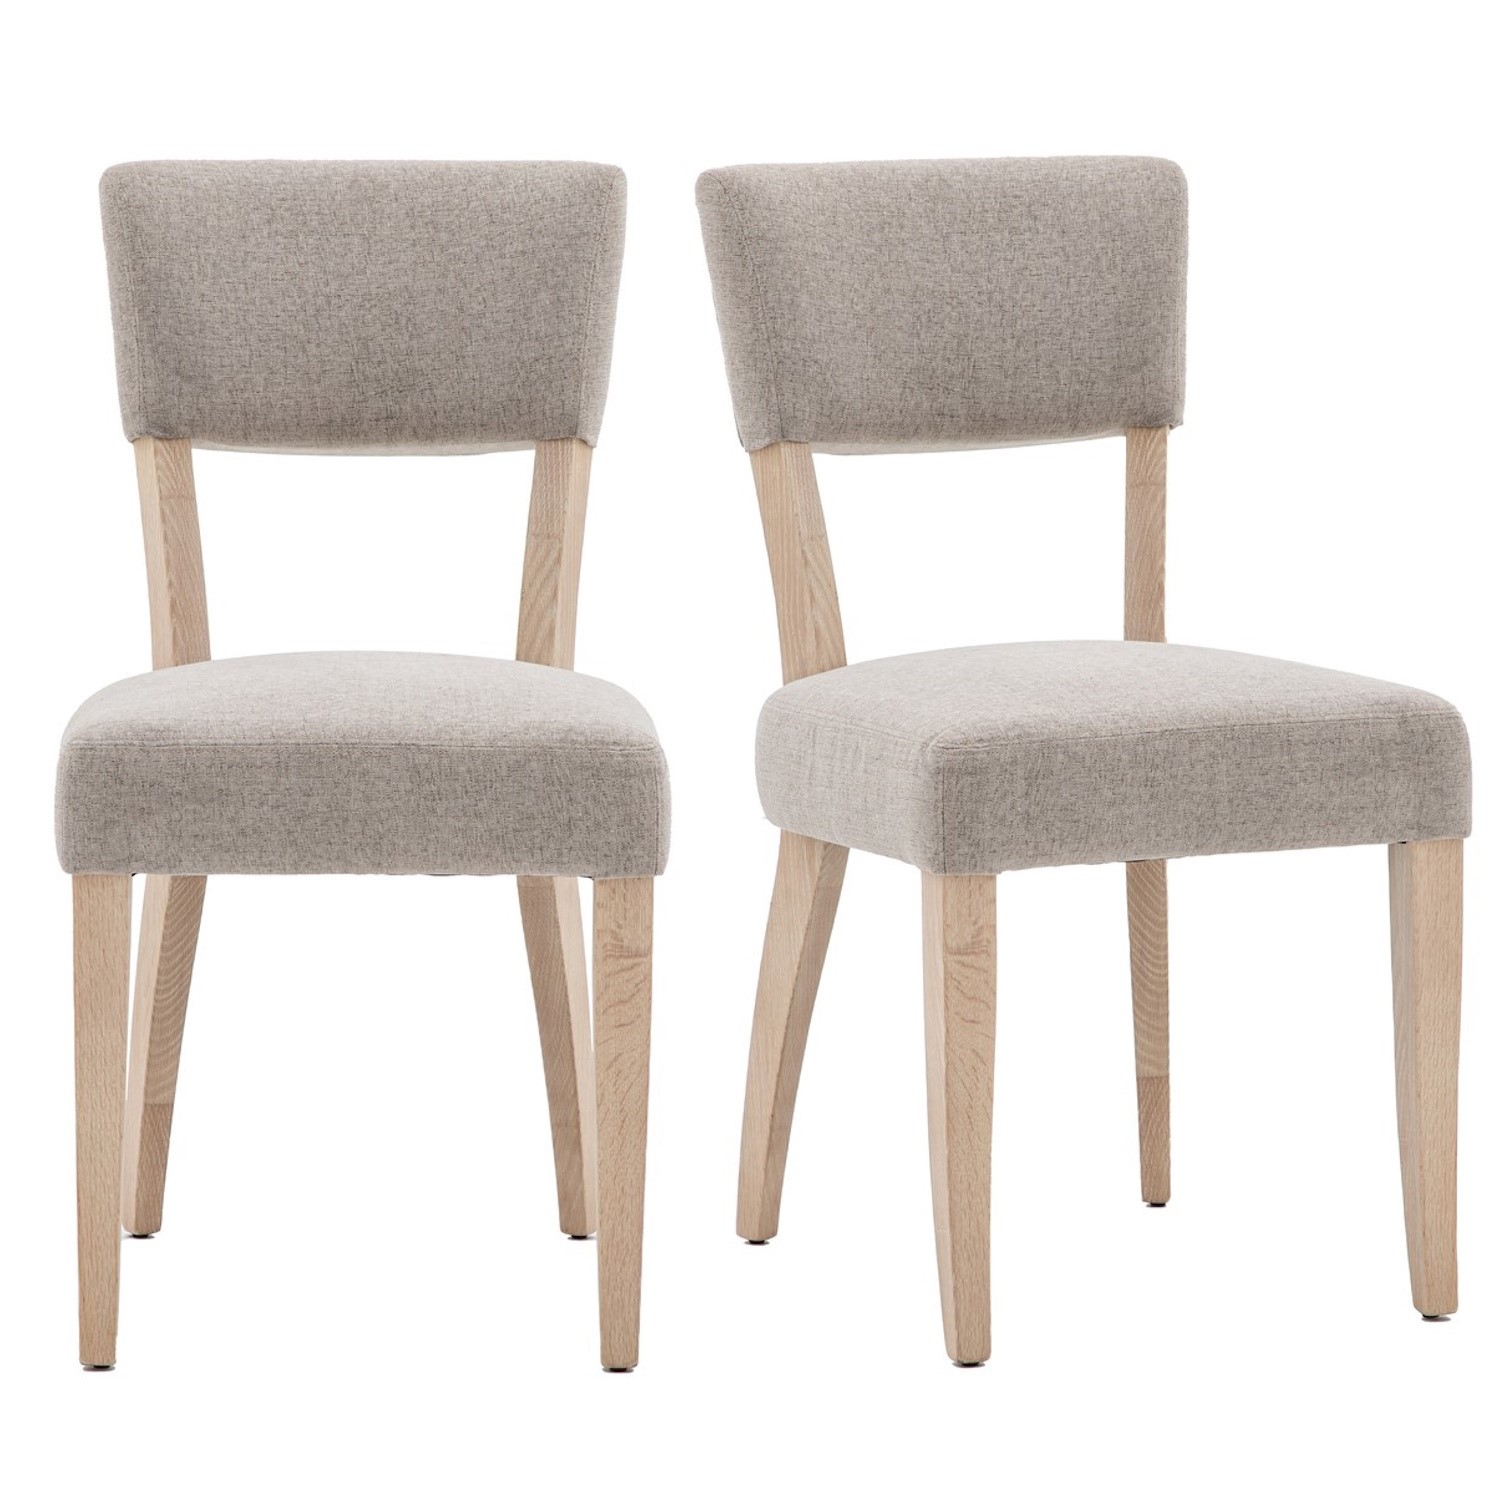 Photo of Eton upholstered dining chairs set of 2 natural - caspian house